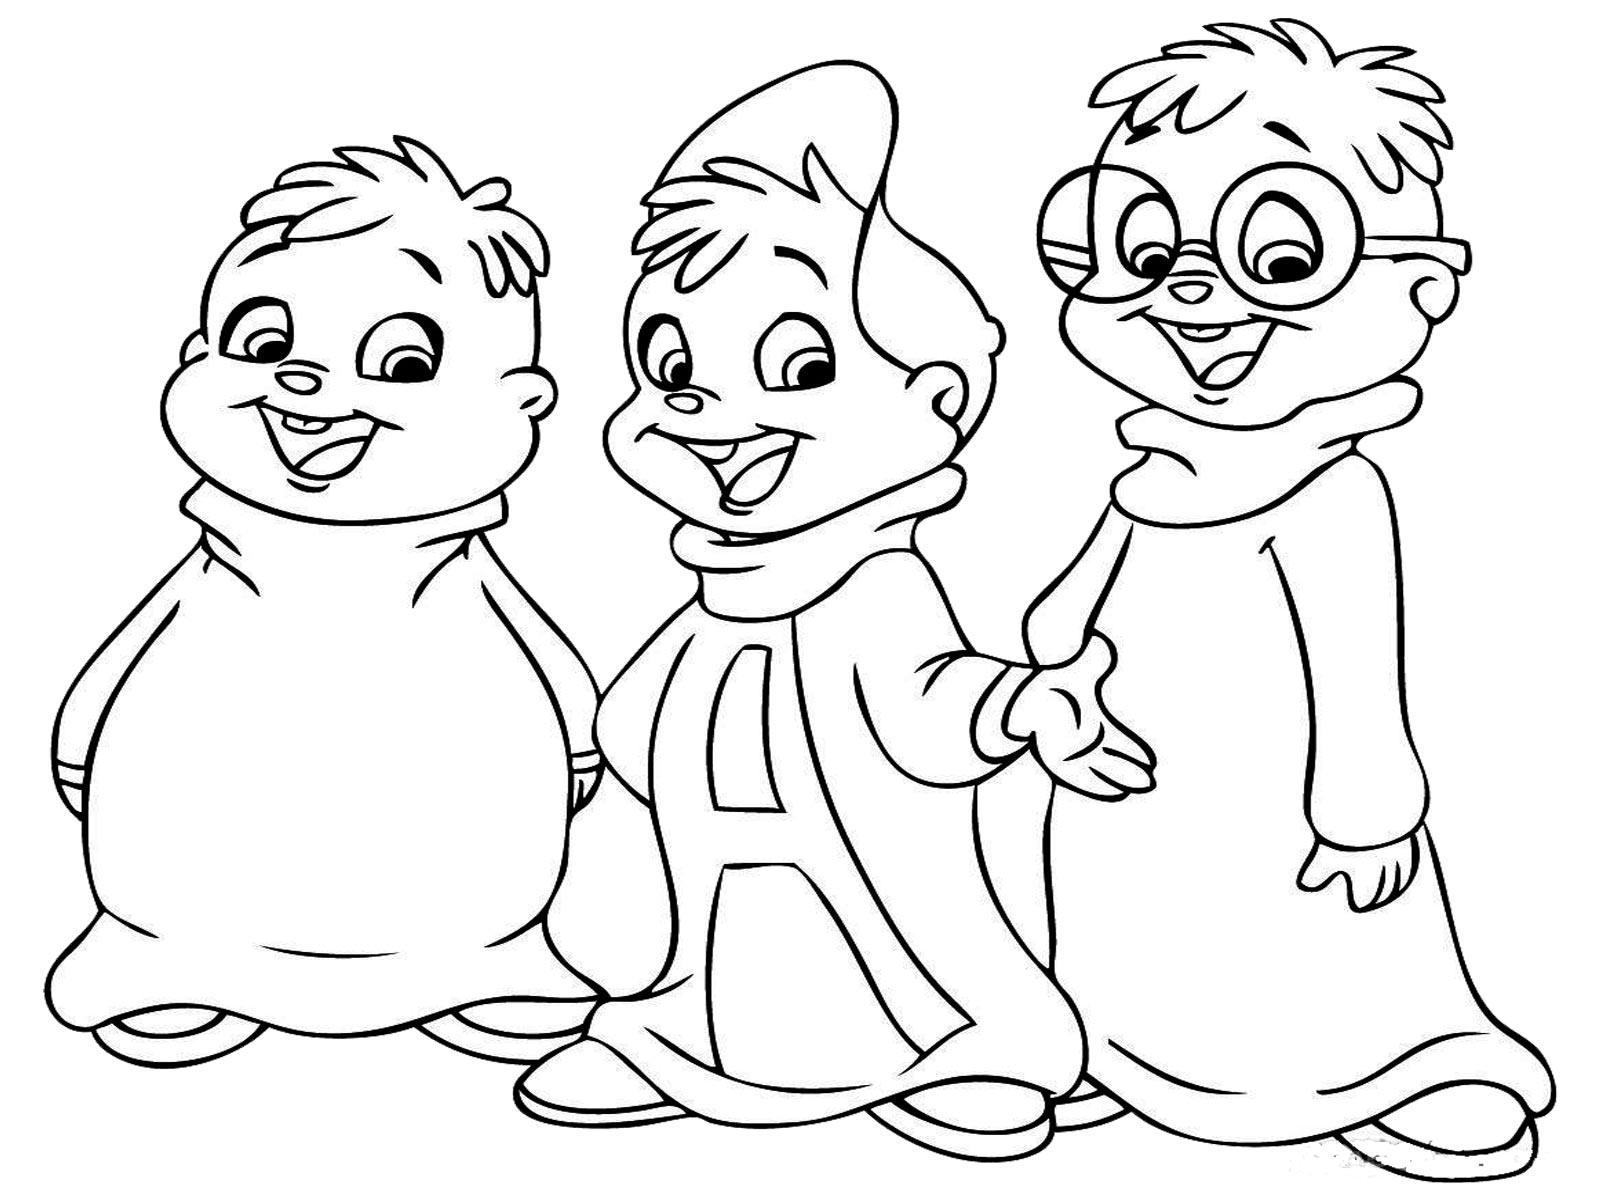 Coloring page: Alvin and the Chipmunks (Animation Movies) #128304 - Free Printable Coloring Pages